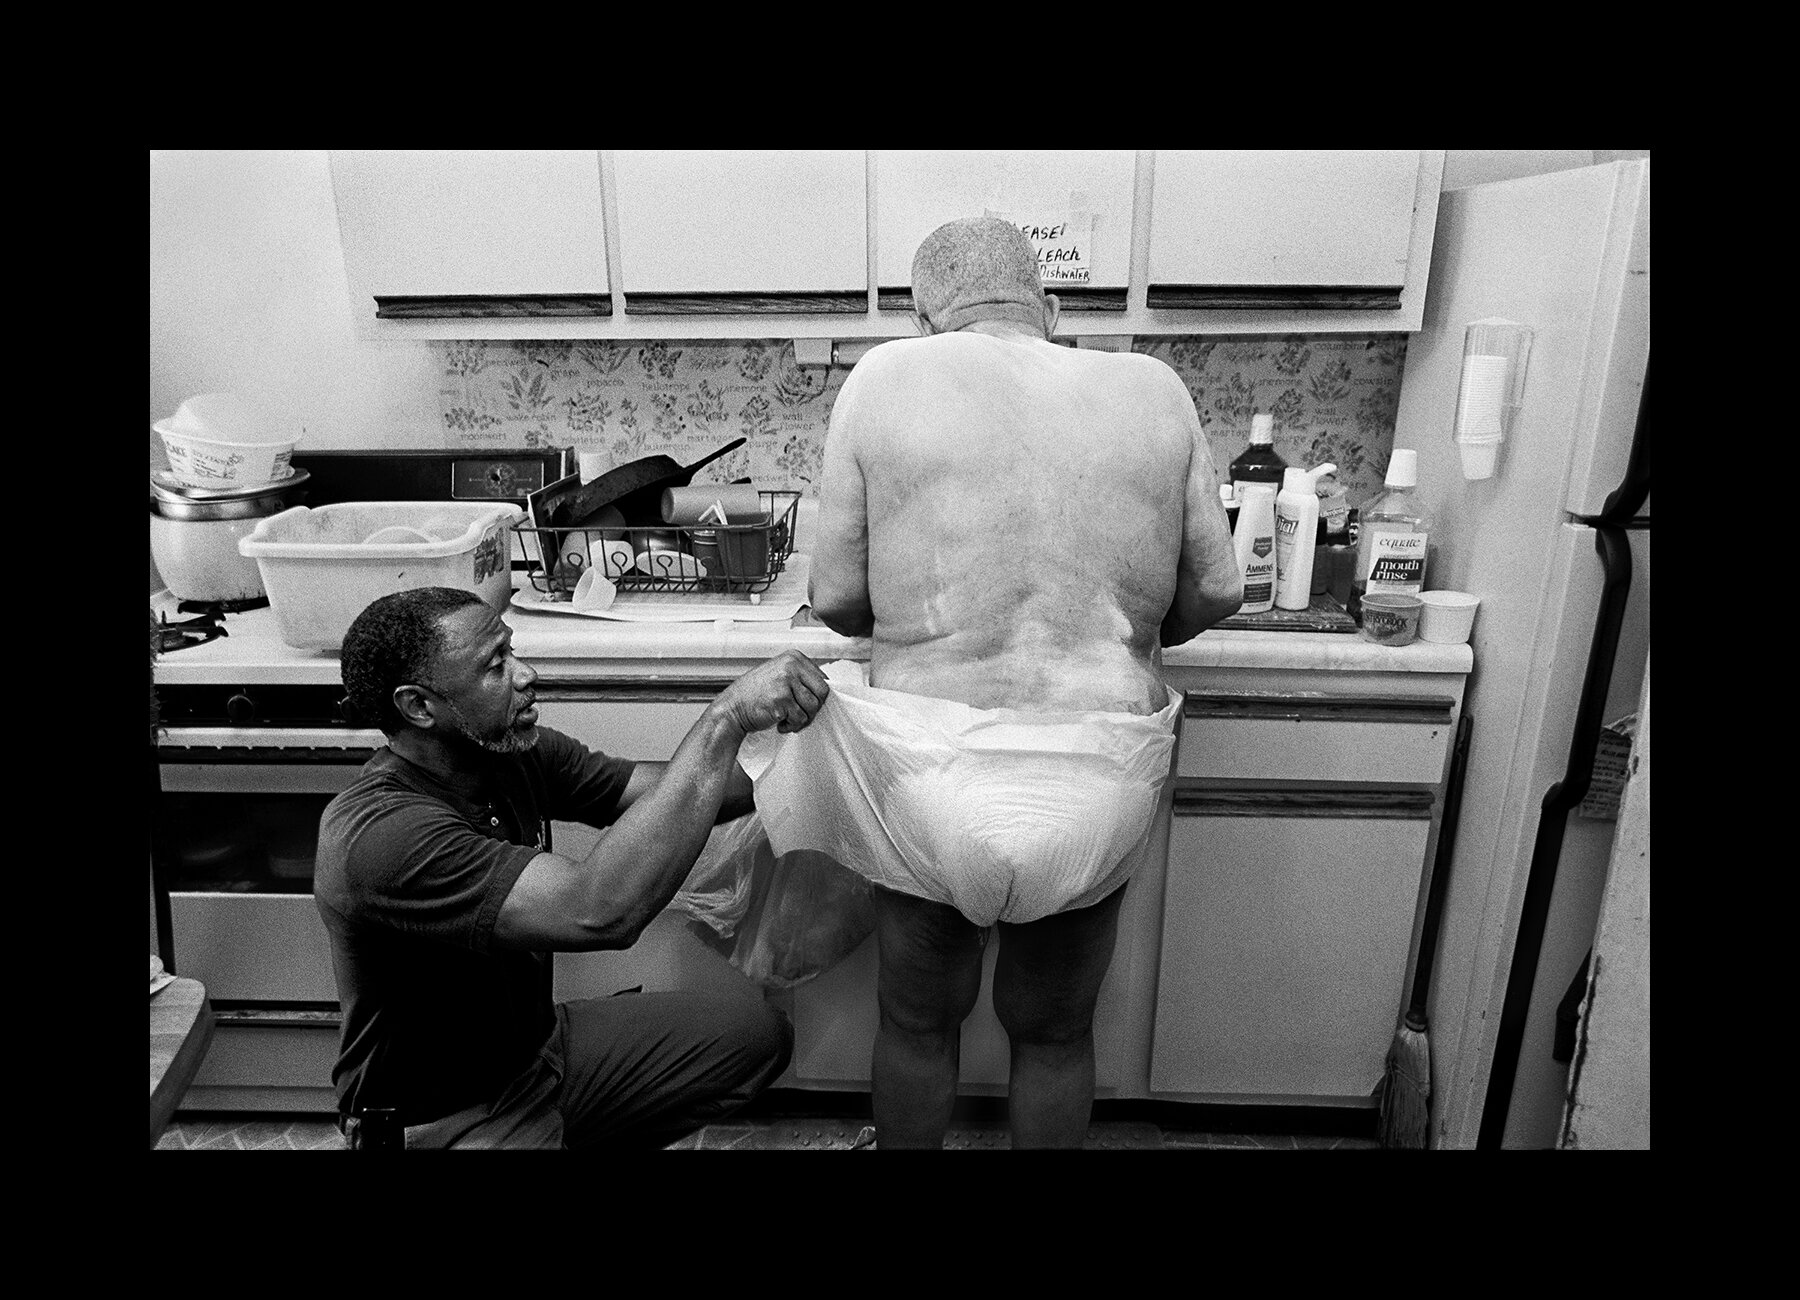  81-year-old veteran James Bowlding is cared for by his son at home in Washington, D.C. 2000 